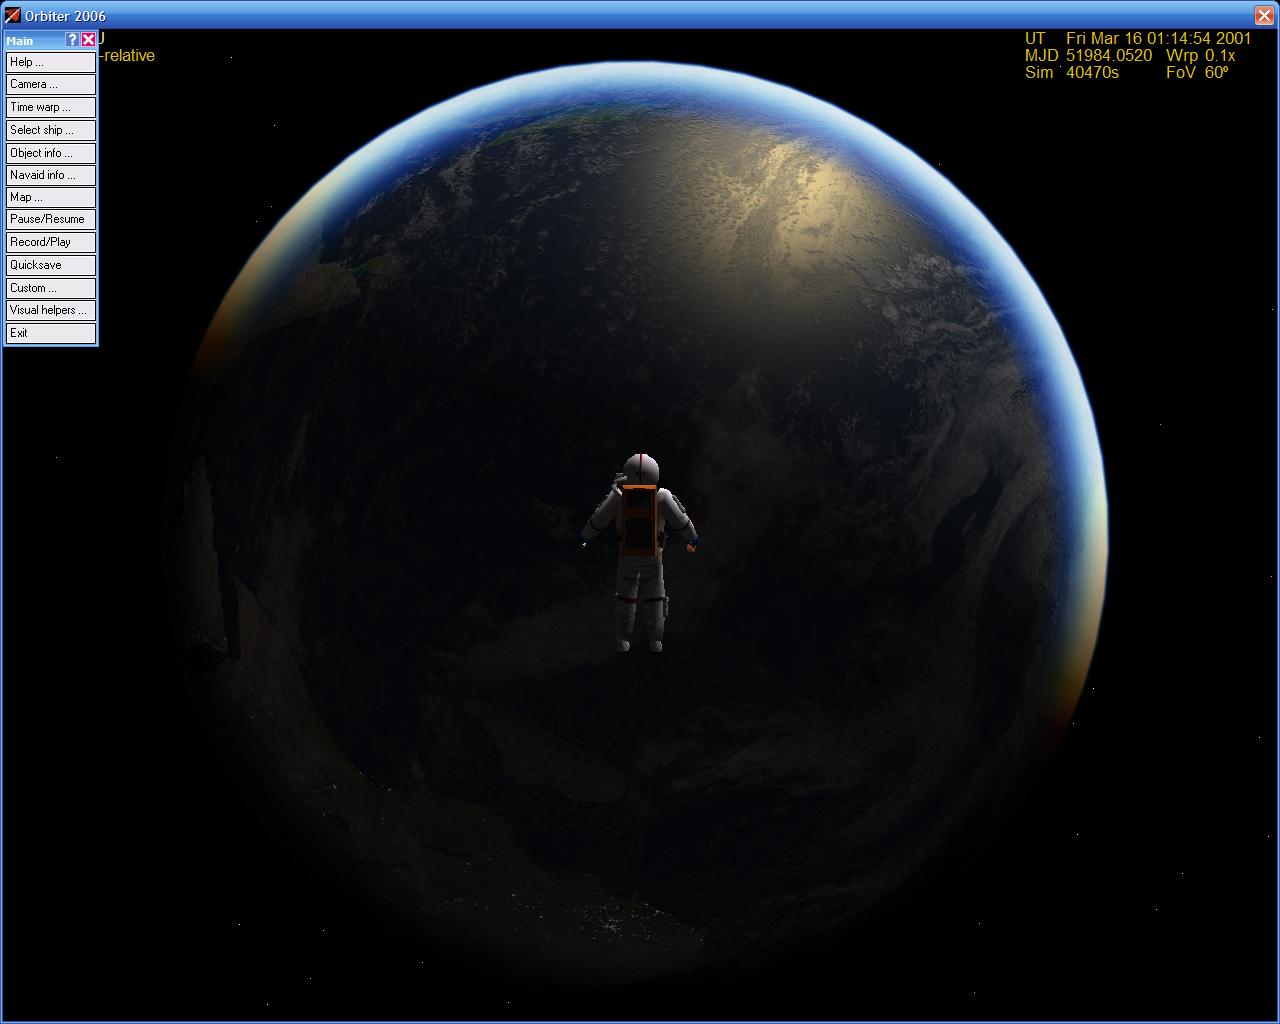 Approaching Earth at a freaking velocity after HARP shot from moon (muzzle velocity was 10000km/s. Don't worry, he was already killed by the high acce